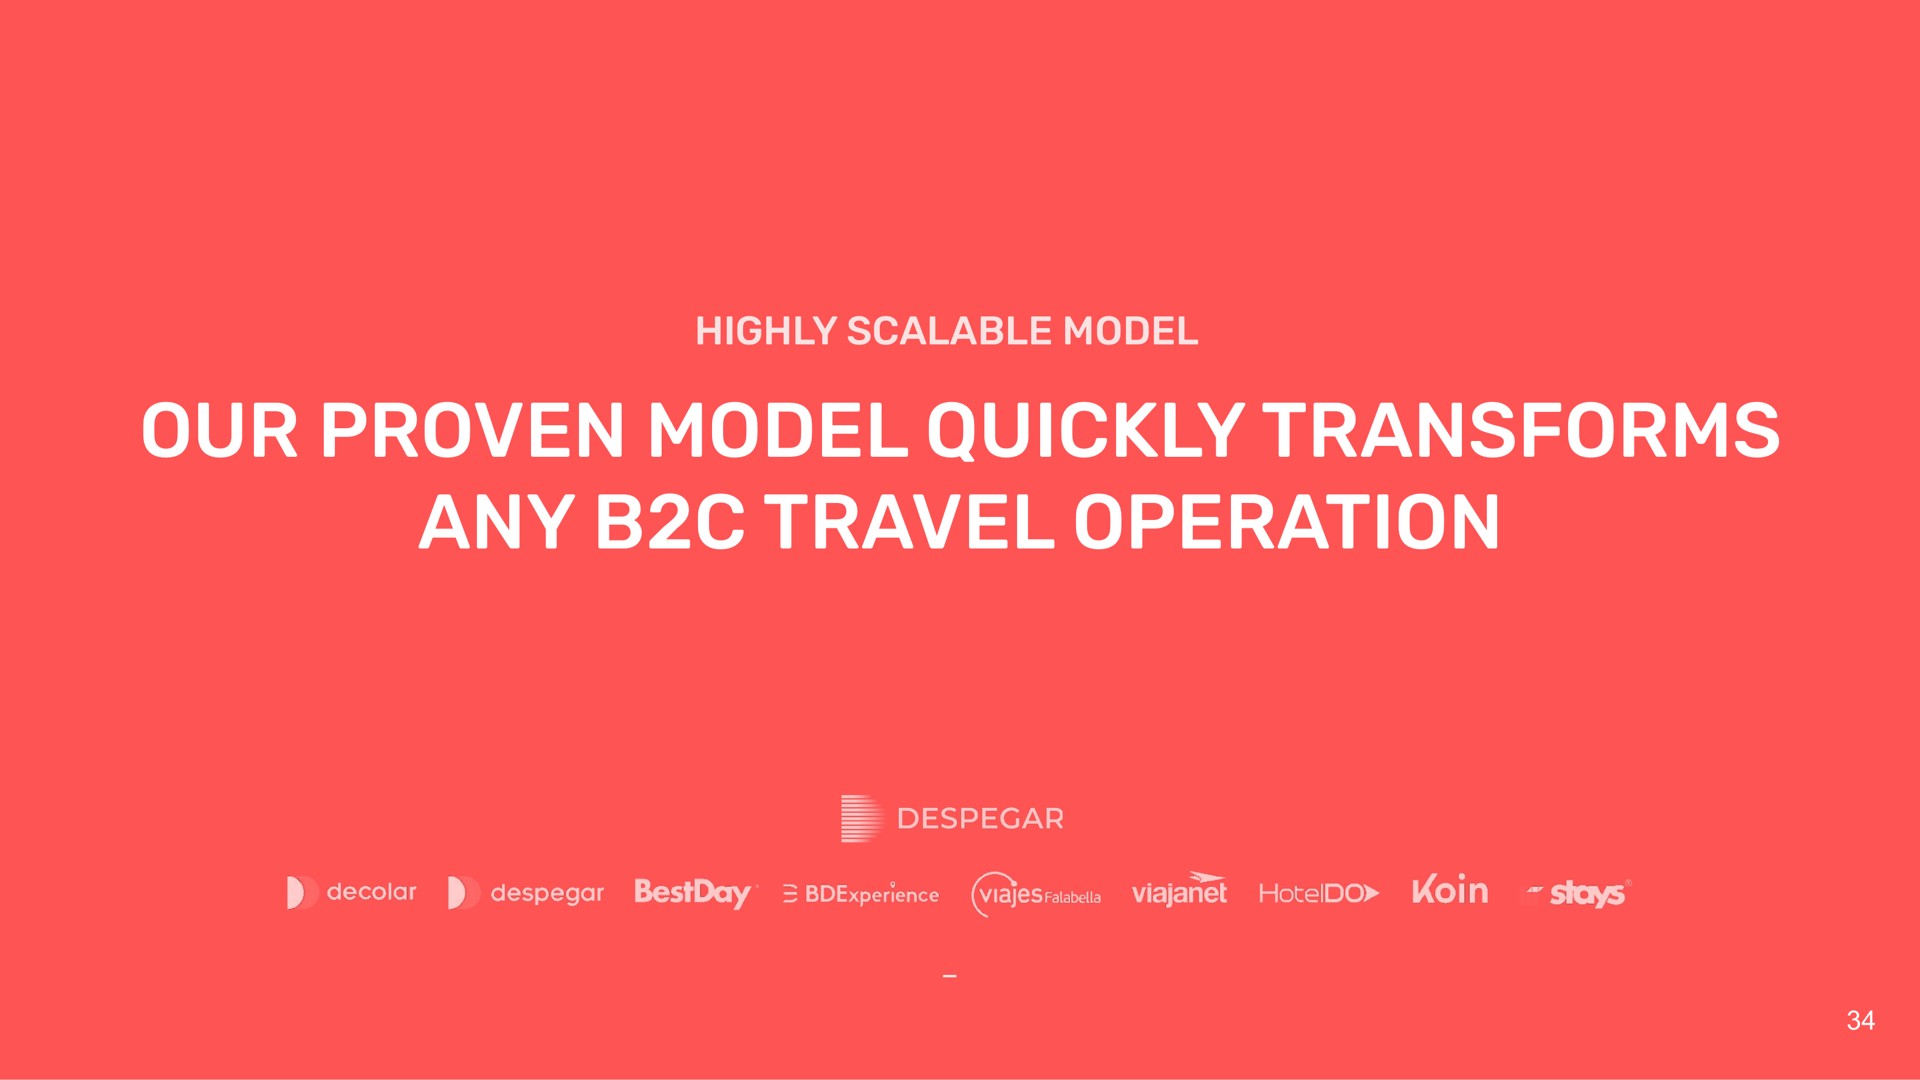 highly scalable model our proven model quickly transforms any travel operation | Despegar